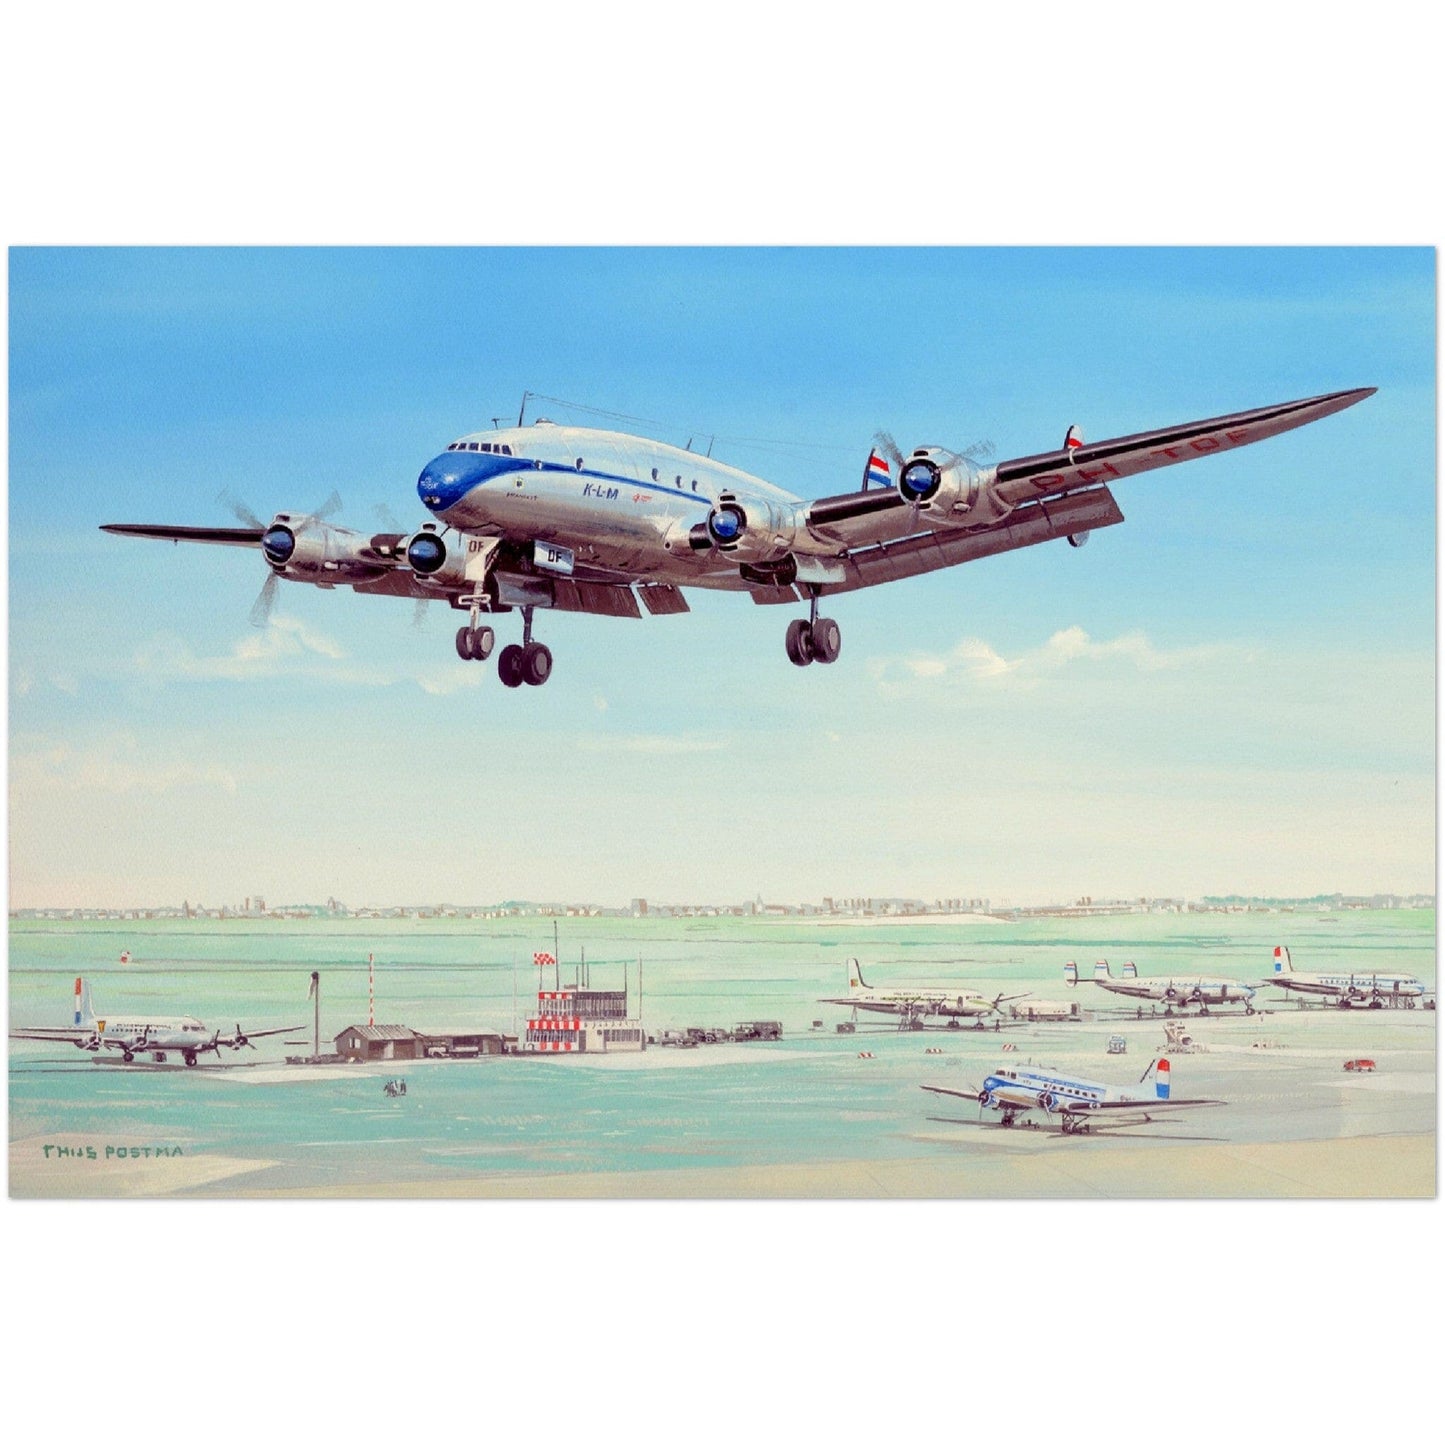 Thijs Postma - Poster - Lockheed L-49 Constellation Over Schiphol 1946-47 Poster Only TP Aviation Art 40x60 cm / 16x24″ 